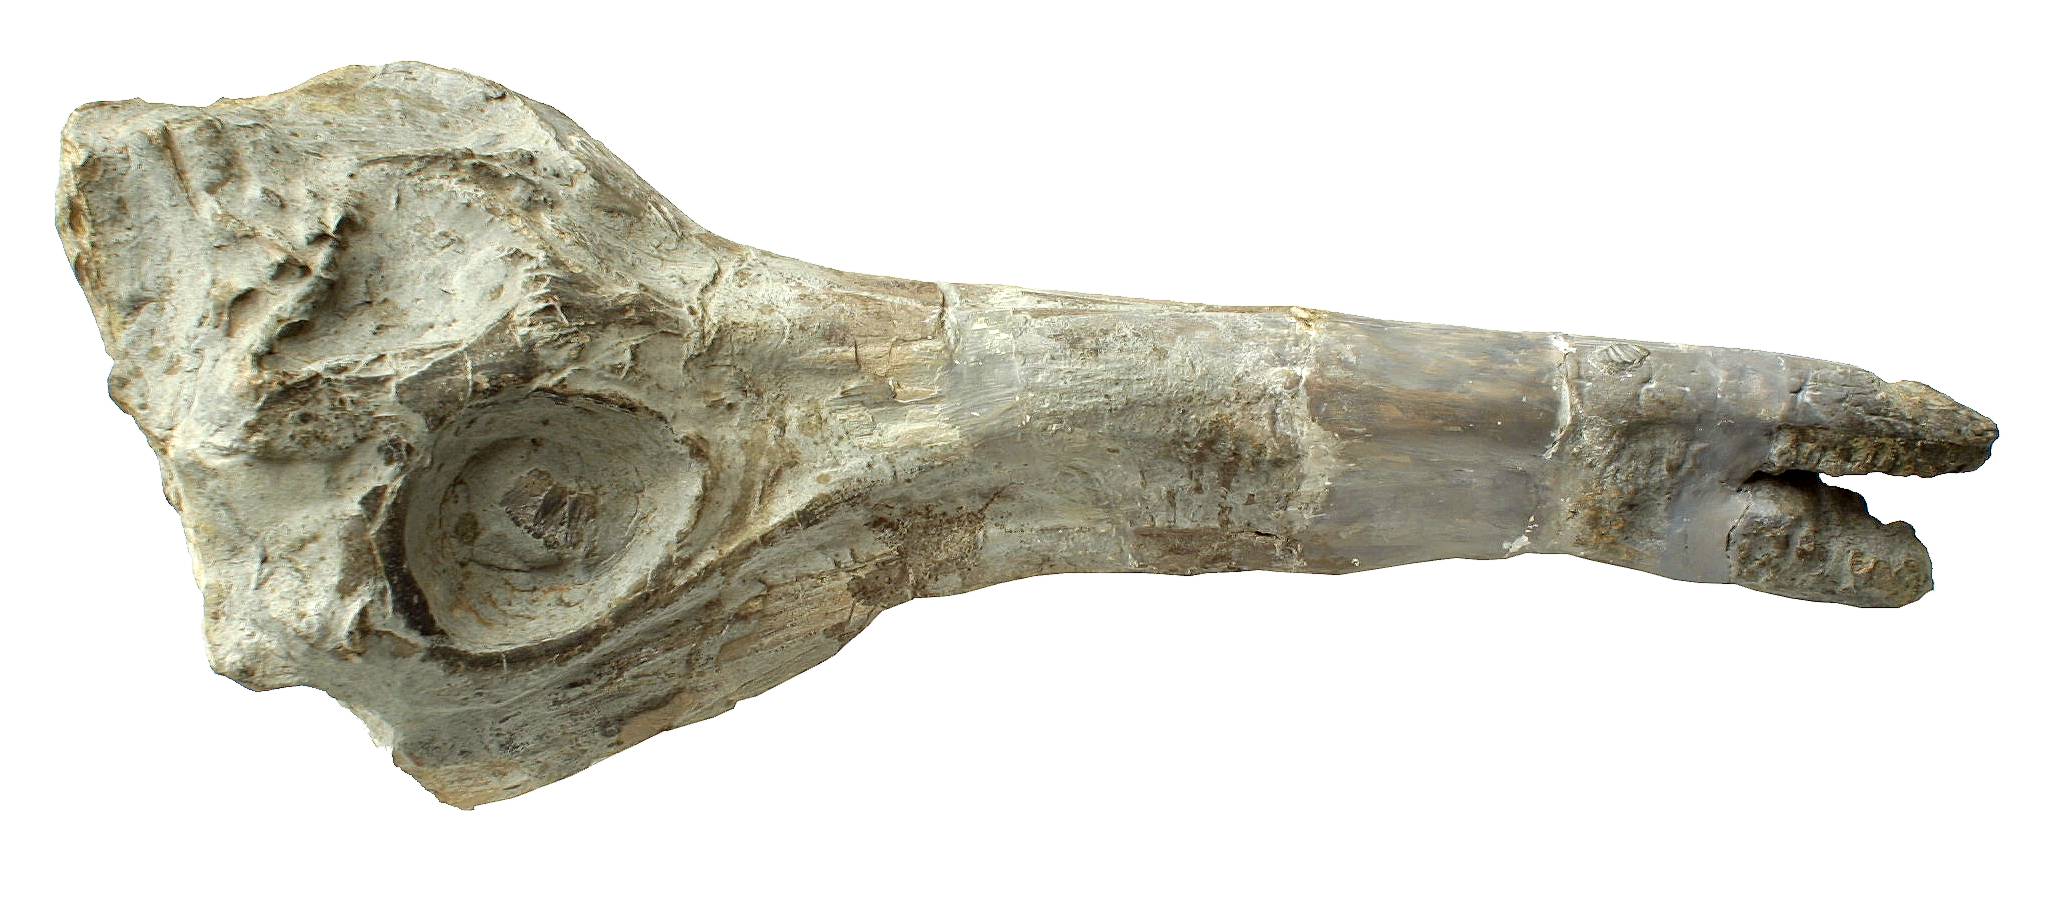 A fossilised ichthyosaur skull from the Herbert Art Gallery & Museum collection